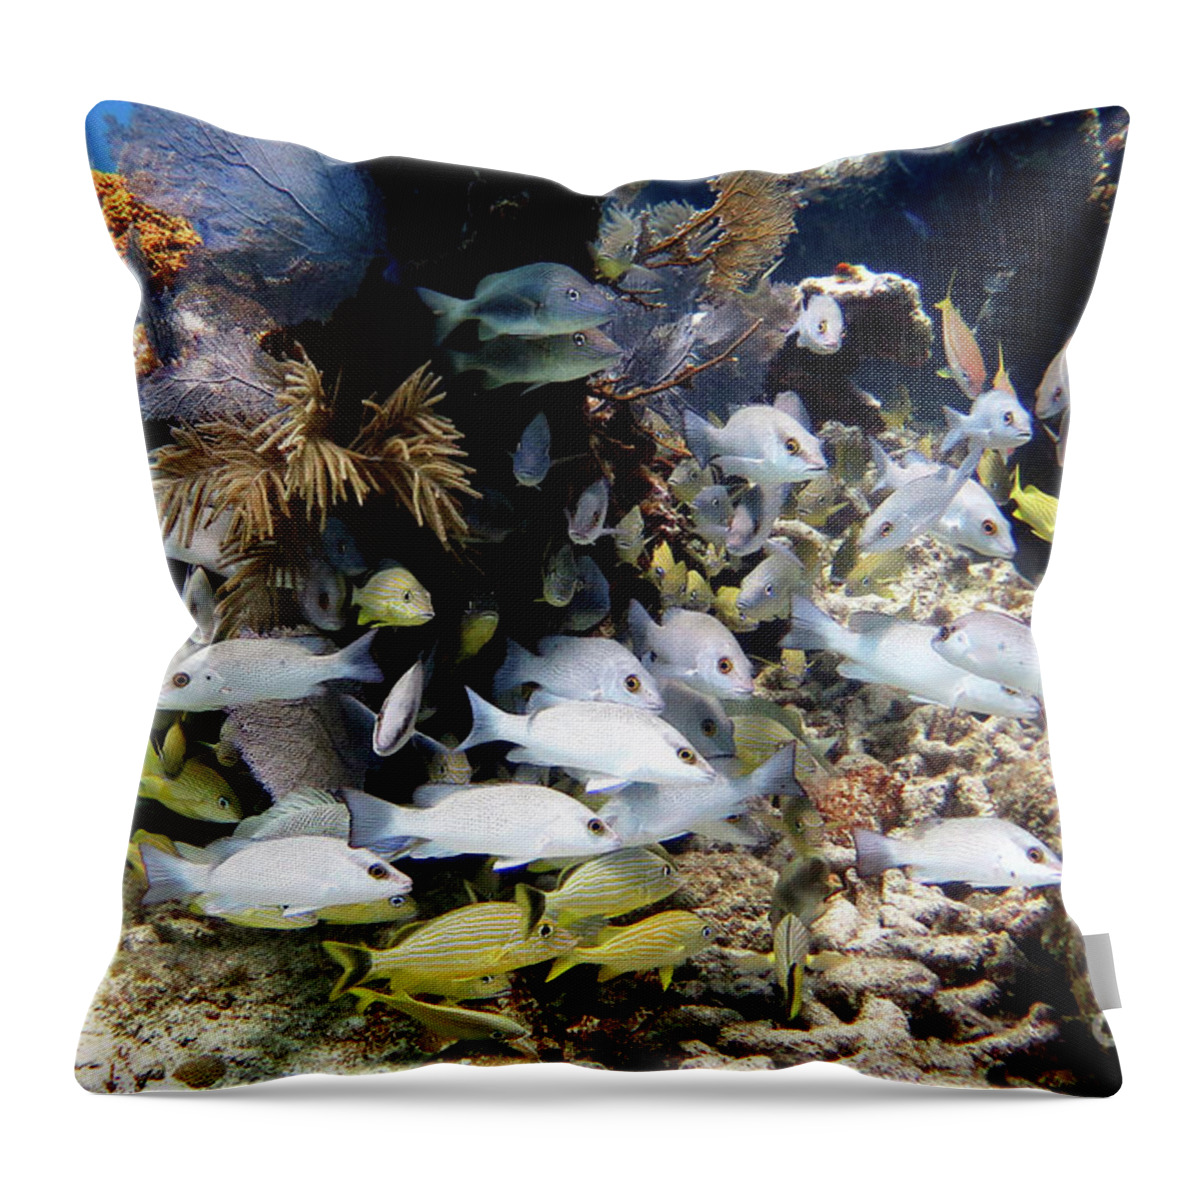 Underwater Throw Pillow featuring the photograph City of Washington 12 by Daryl Duda